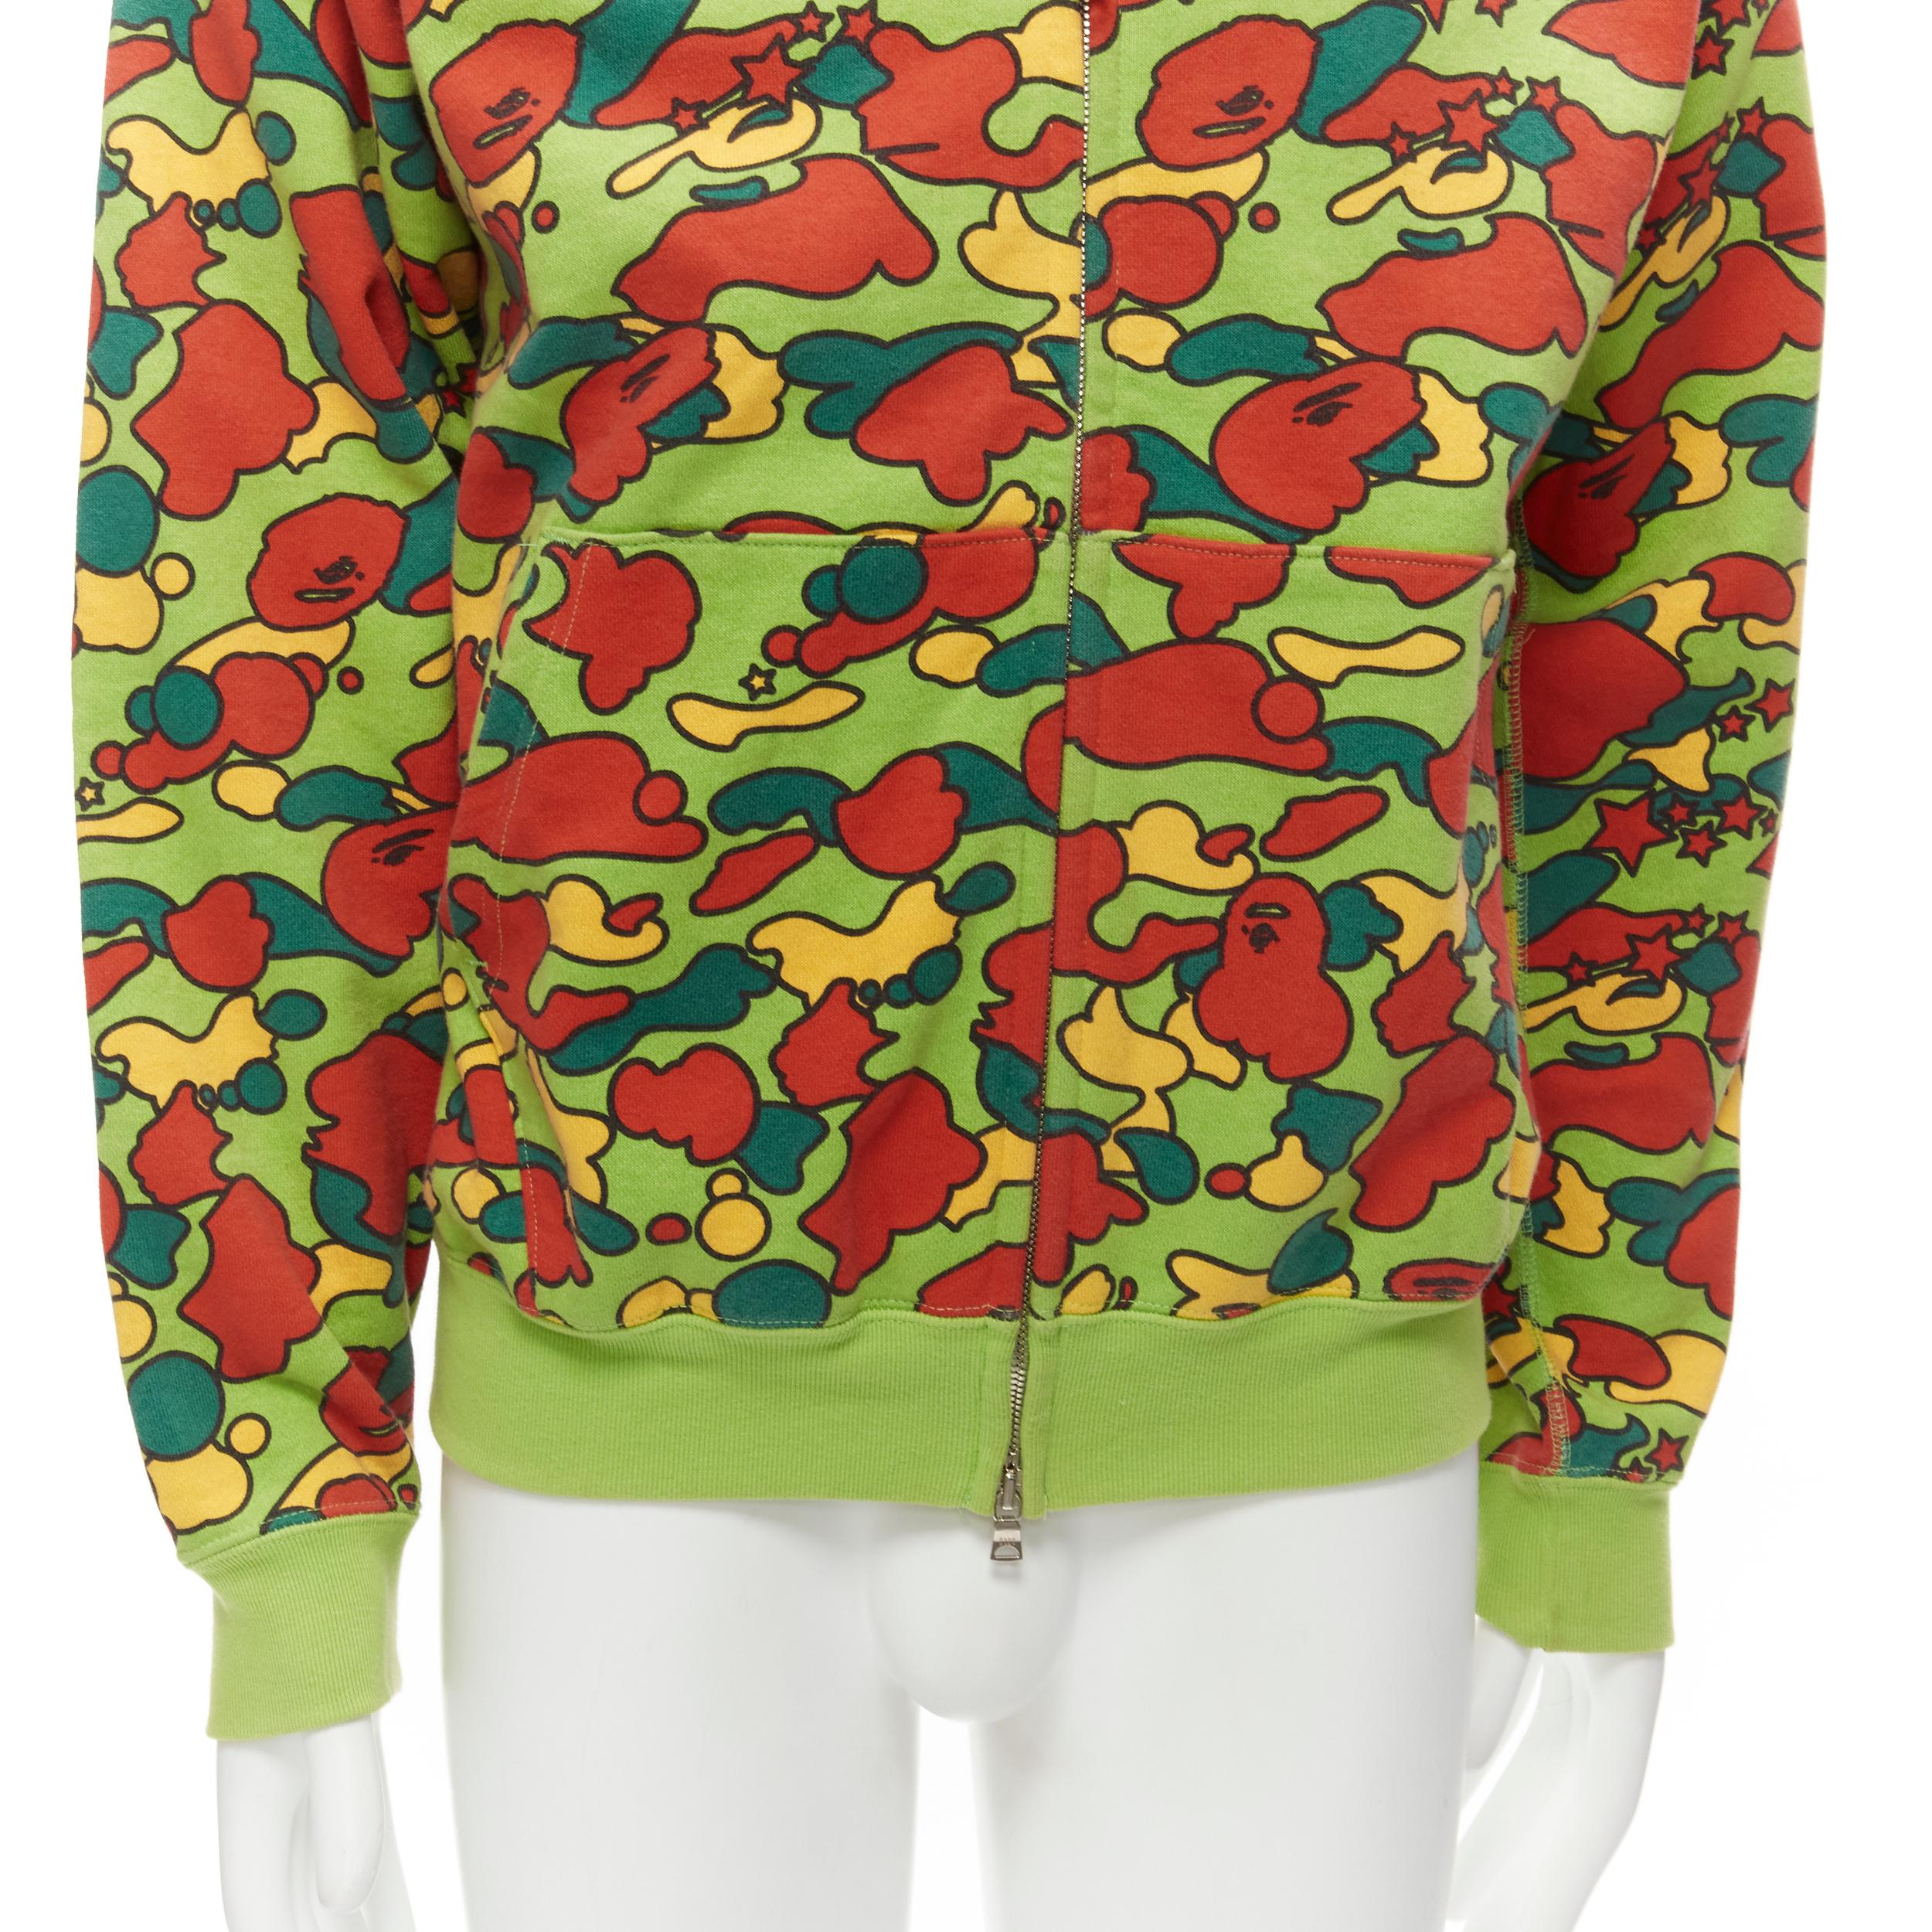 BAPE A BATHING APE Vintage green red yellow camo zip up hoodie M 5